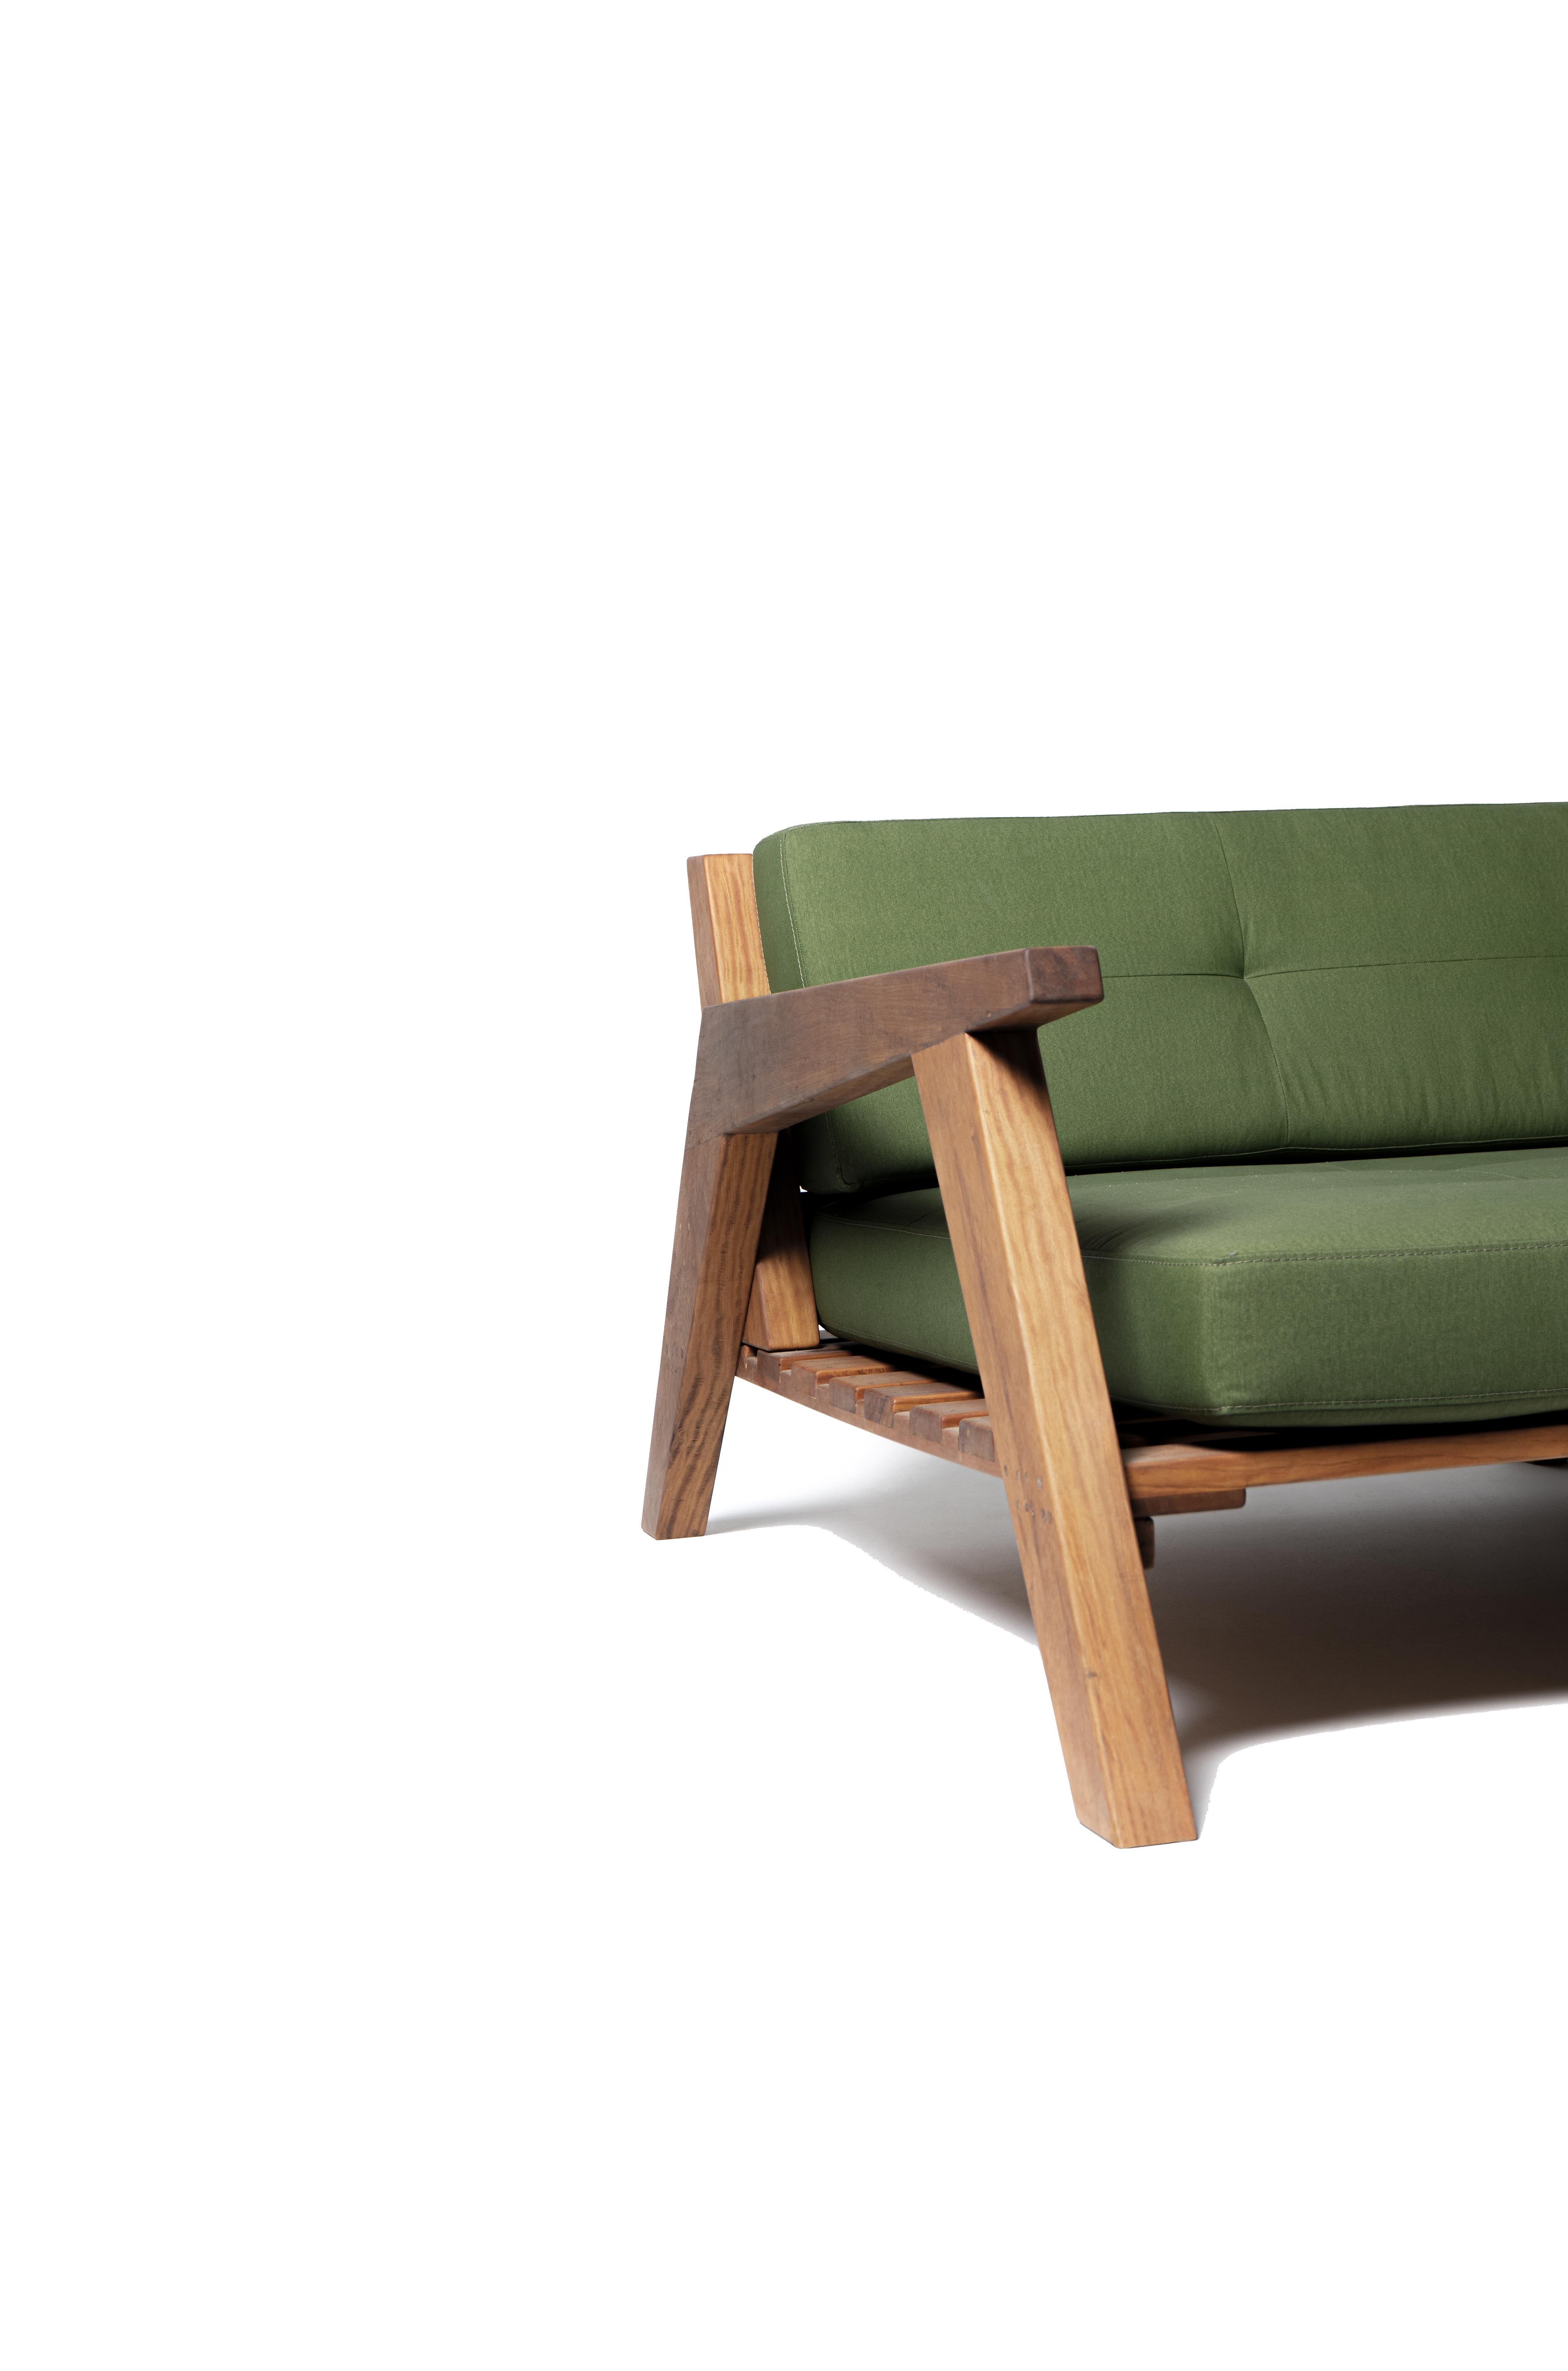 Hand-Crafted Minimalist Brazilian Handcrafted Chaise Sofa 